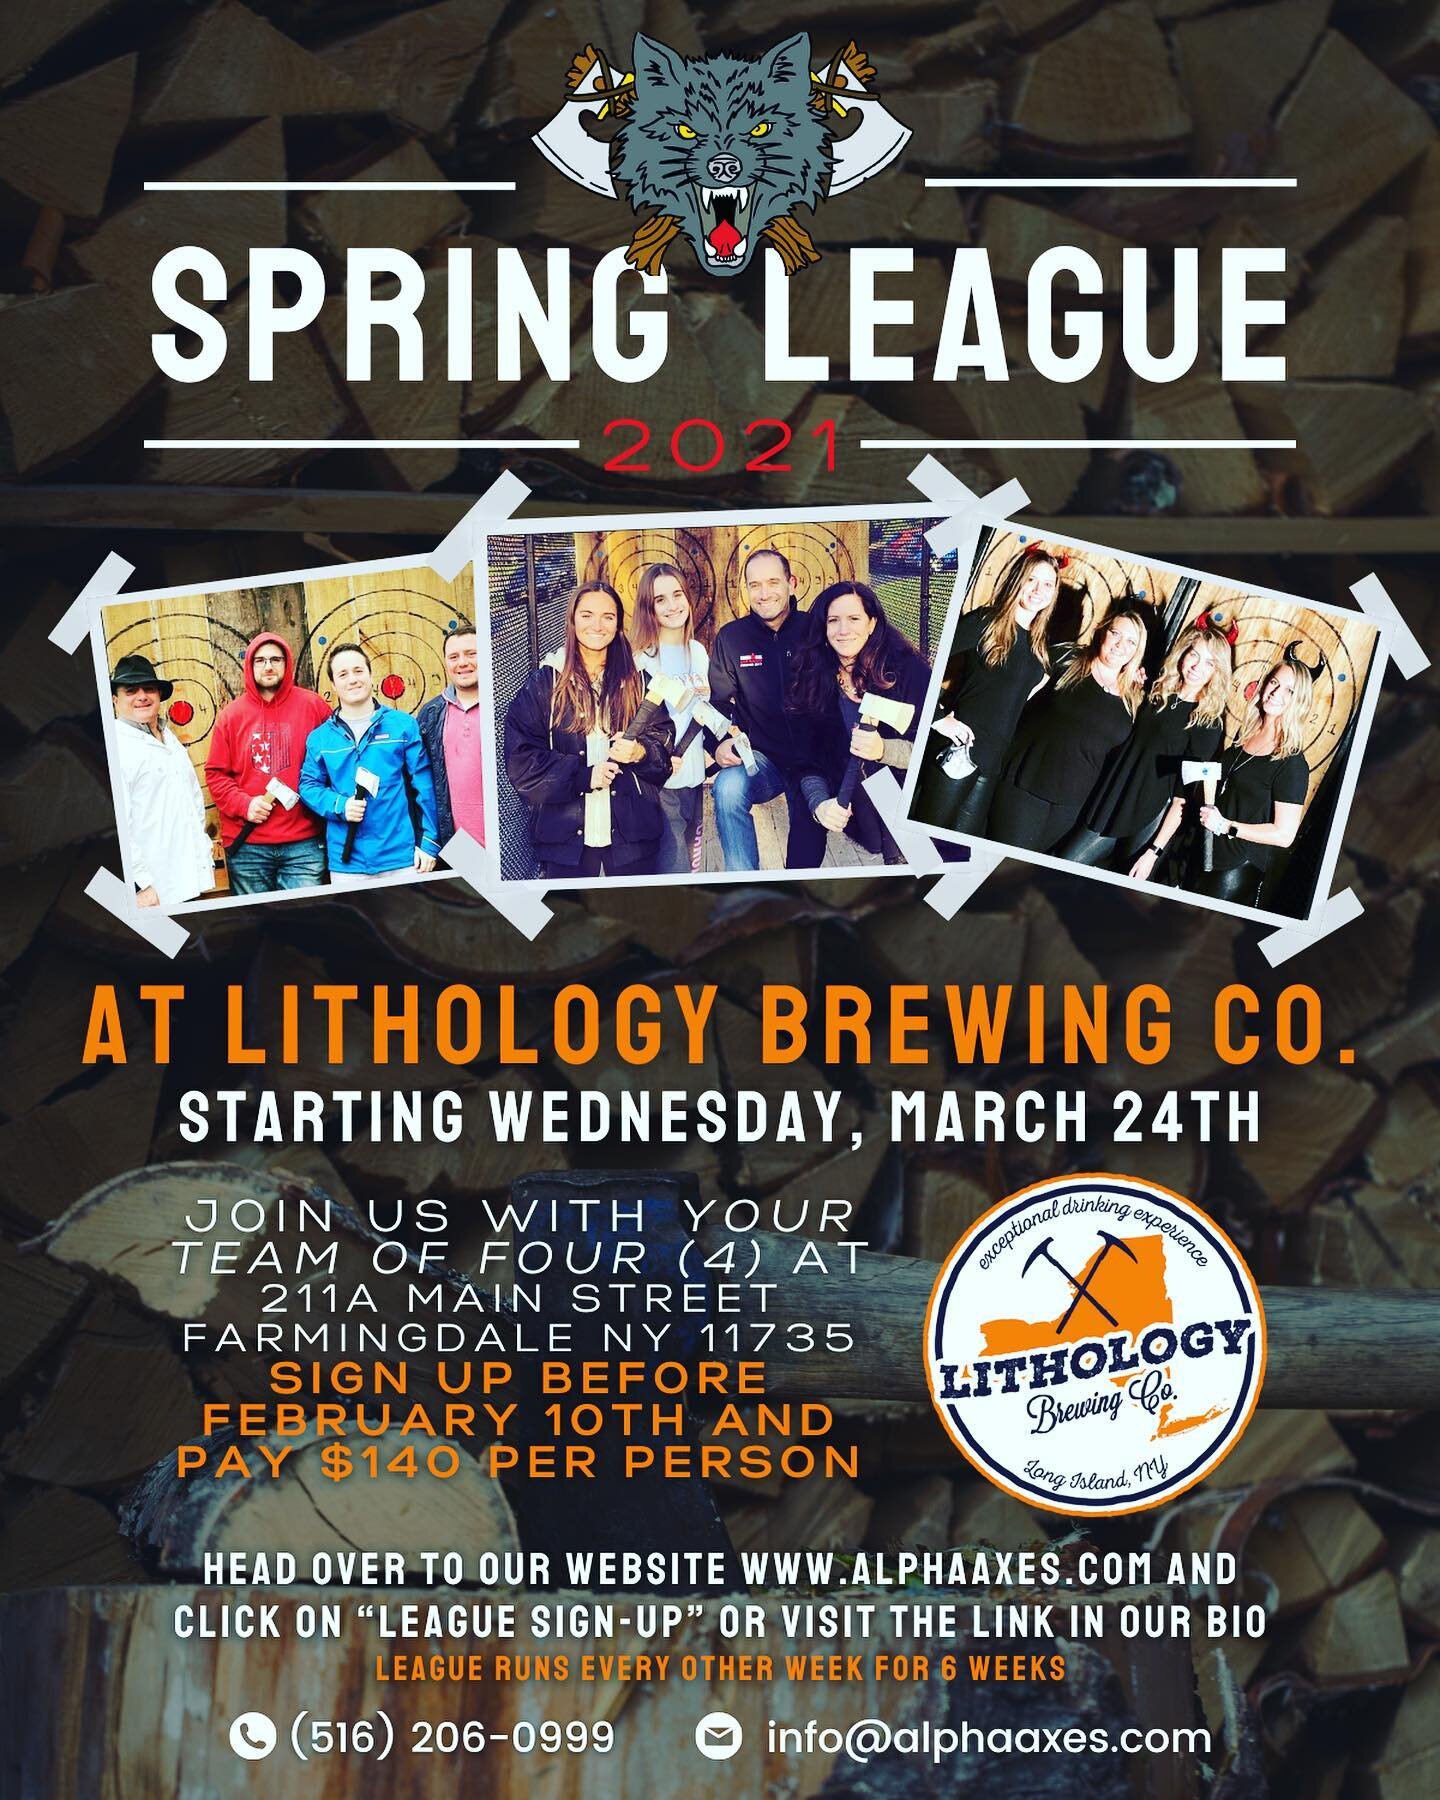 🚨NEW Spring League at Lithology Brewing Co., in Farmingdale, NY! 
🪓Starts, Wednesday, March 24, 2021
🪓Runs everyother week for 6 weeks 
🪓Teams of 4
🪓T-Shirts and trophies!
🪓$140 per person if you sign-up before February 10th! 
🪓 To register go